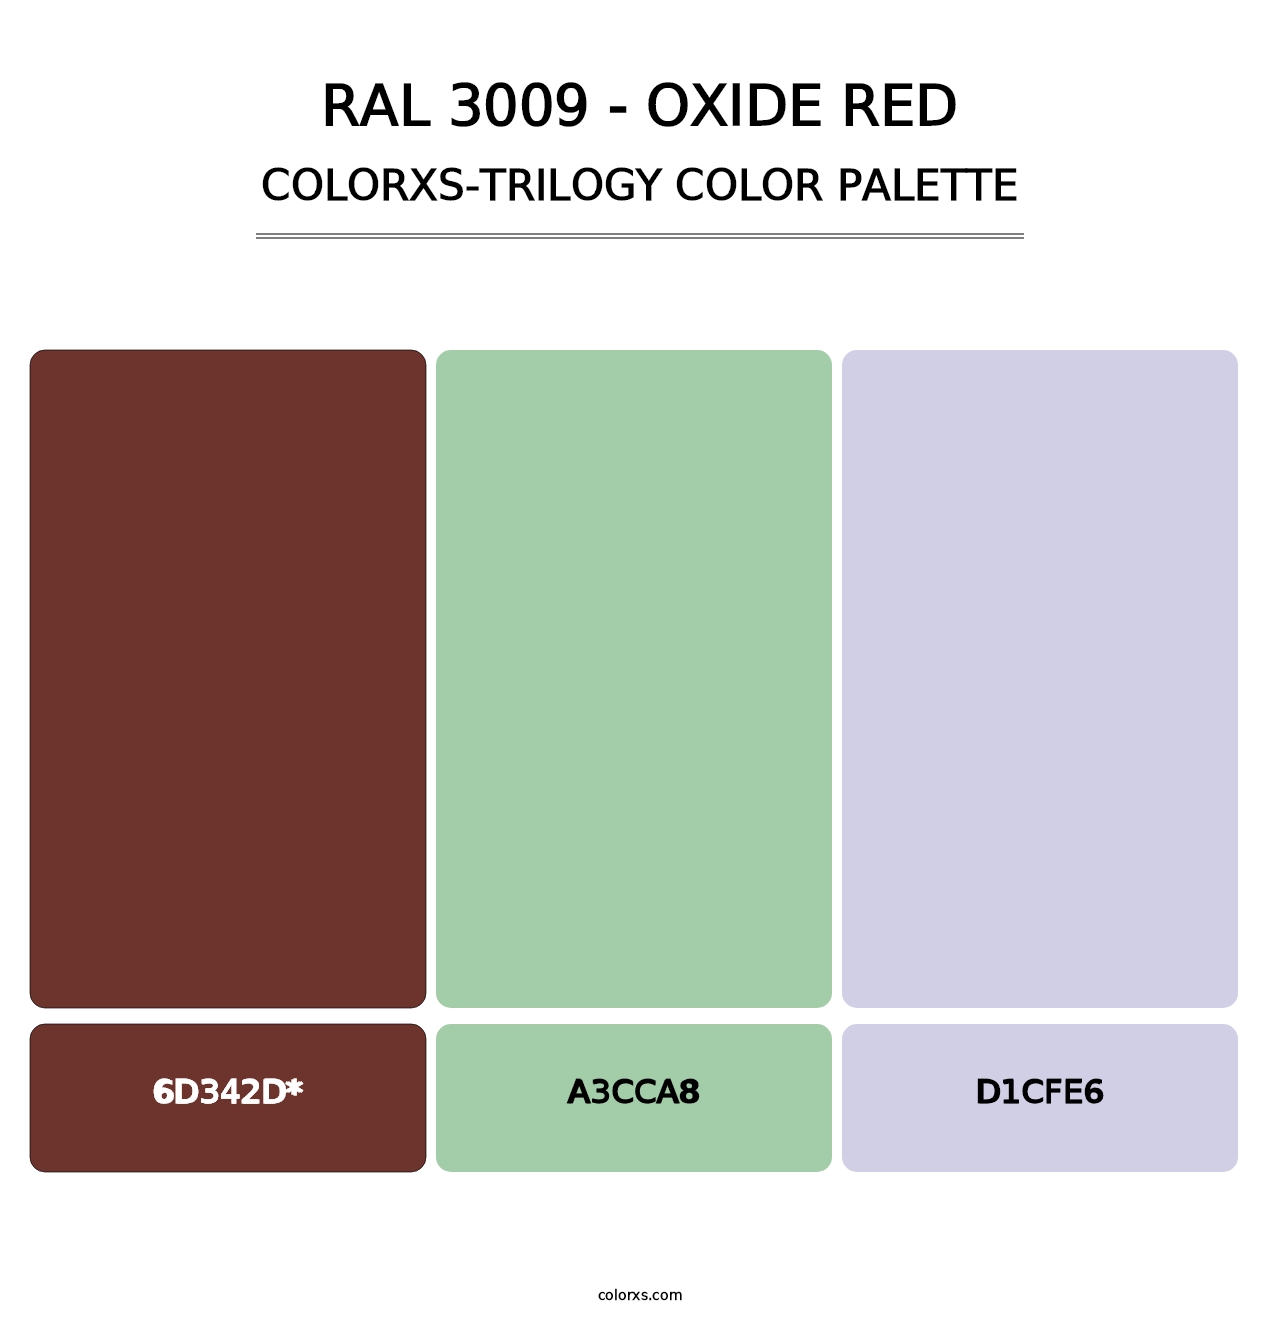 RAL 3009 - Oxide Red - Colorxs Trilogy Palette